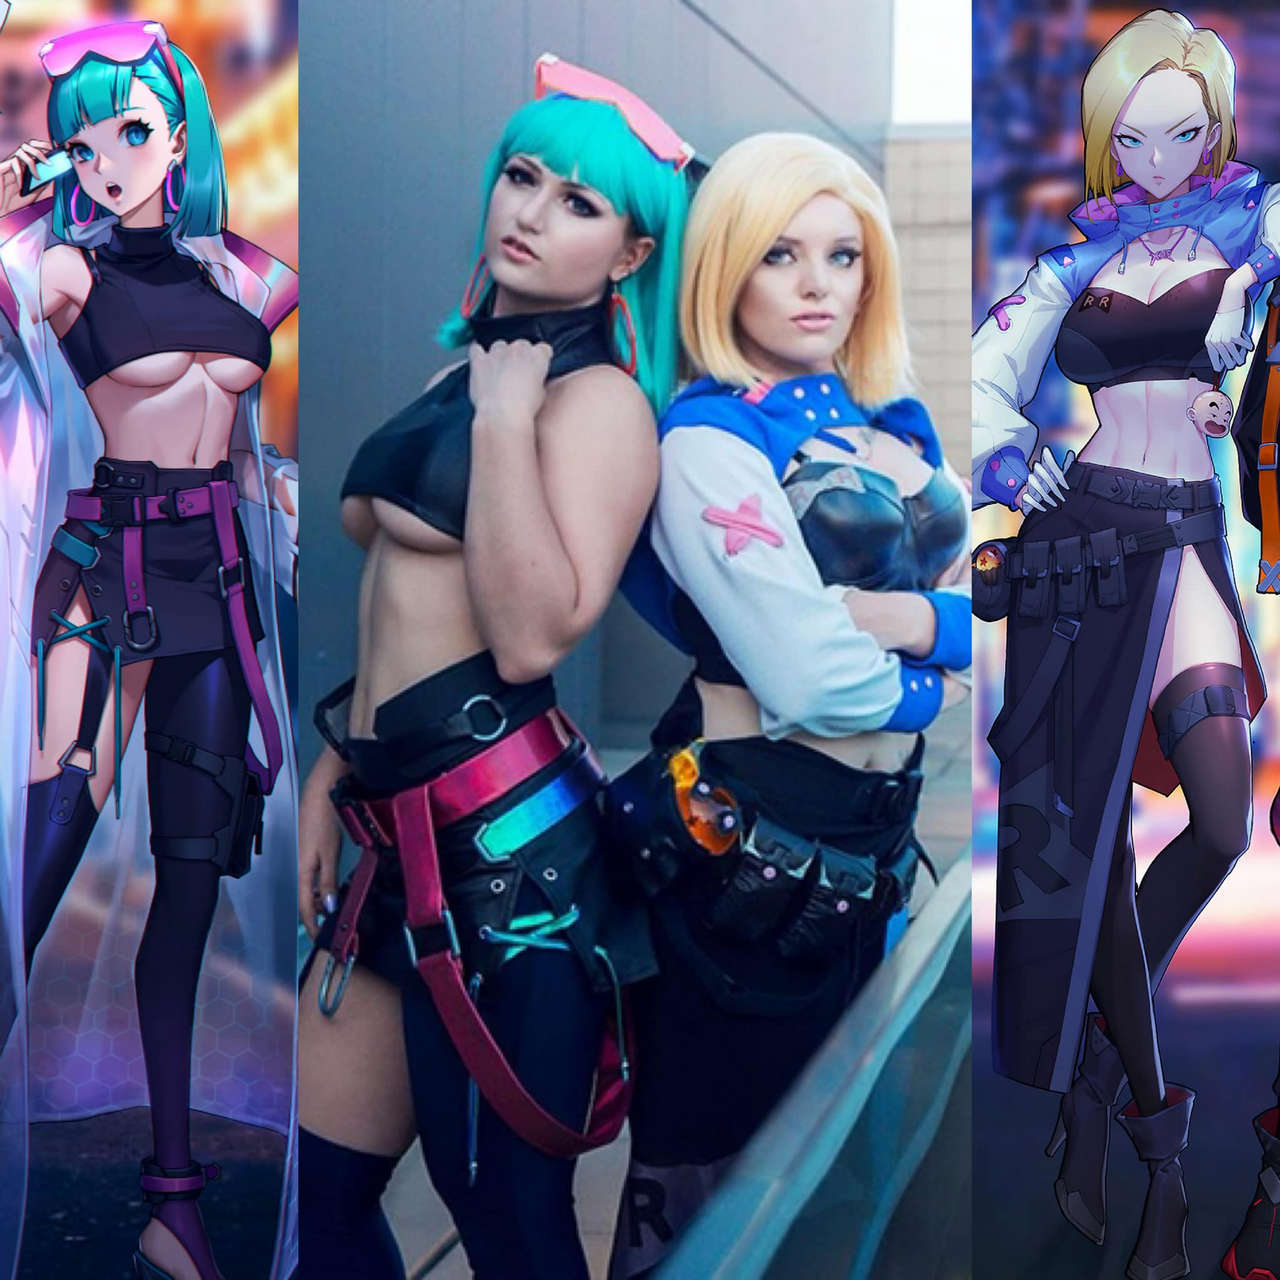 Cyberpunk Bulma And Android 18 By Ohmysophii And Termina Cosplay Based On Artwork By Xhe199